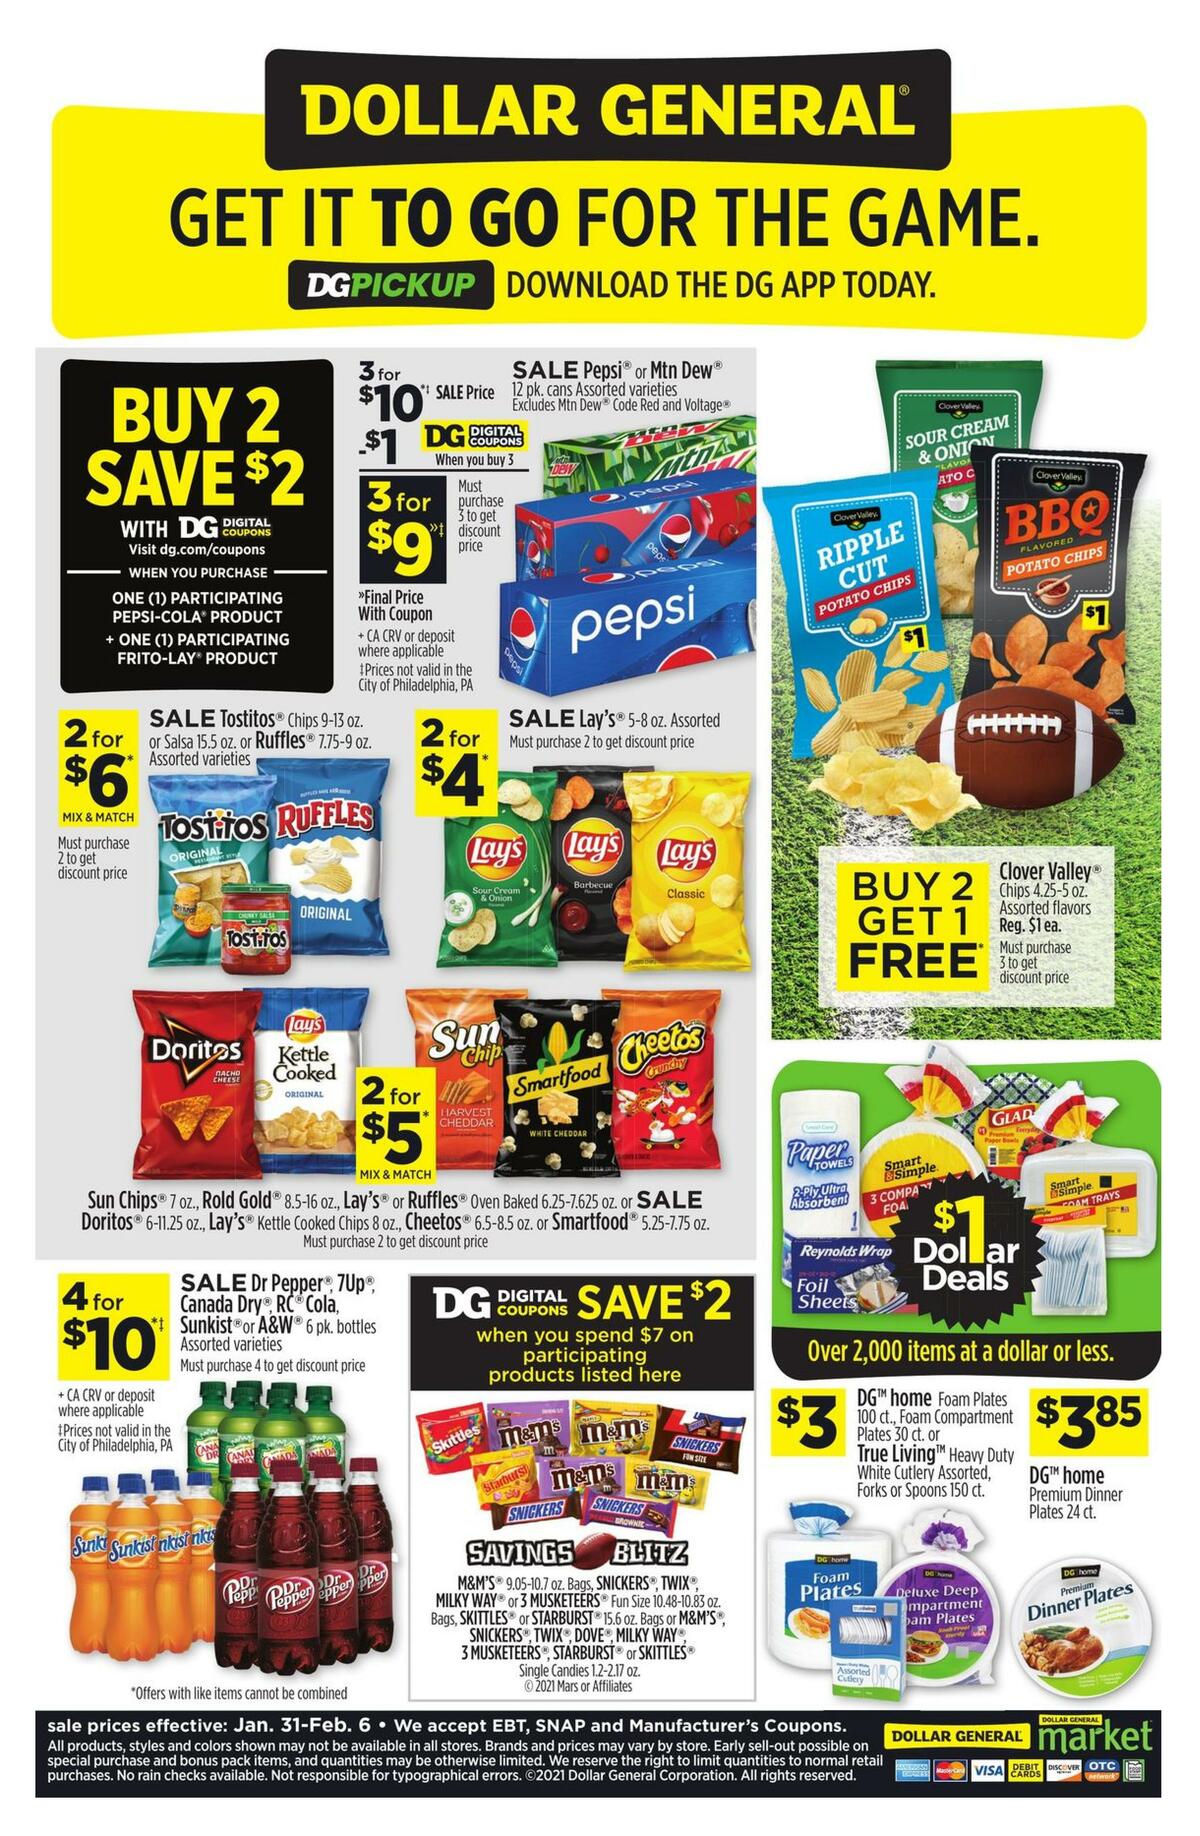 Dollar General Get game day ready with Dollar General. Weekly Ad from January 31